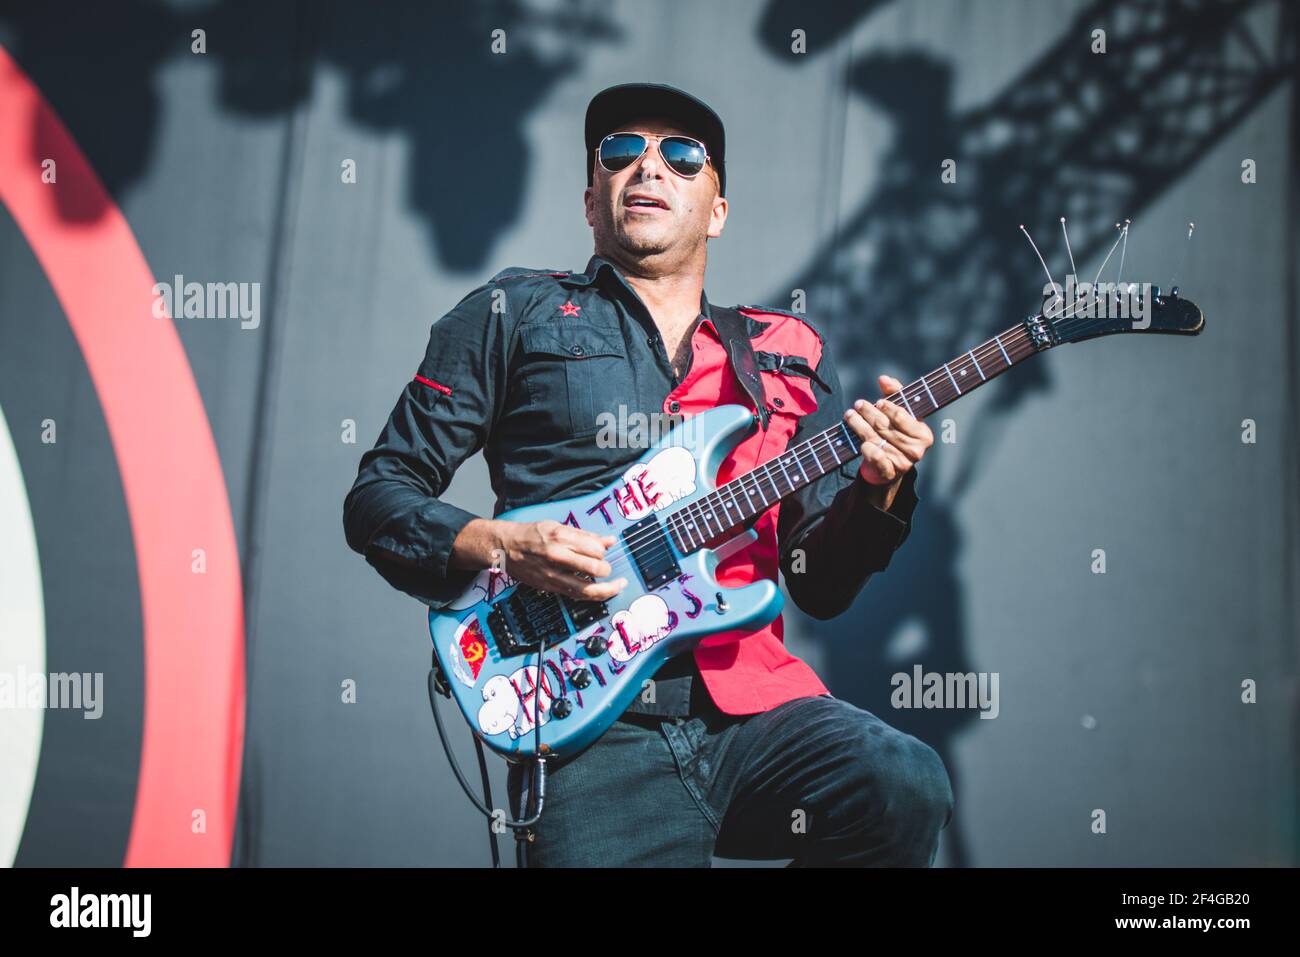 ITALY, FIRENZE 2017: Tom Morello, guitarist of the American rap/rock super  group Prophets of Rage (consisted of members of Rage Agains the Machine,  Cypress Hill and Public Enemy), performing live on stage